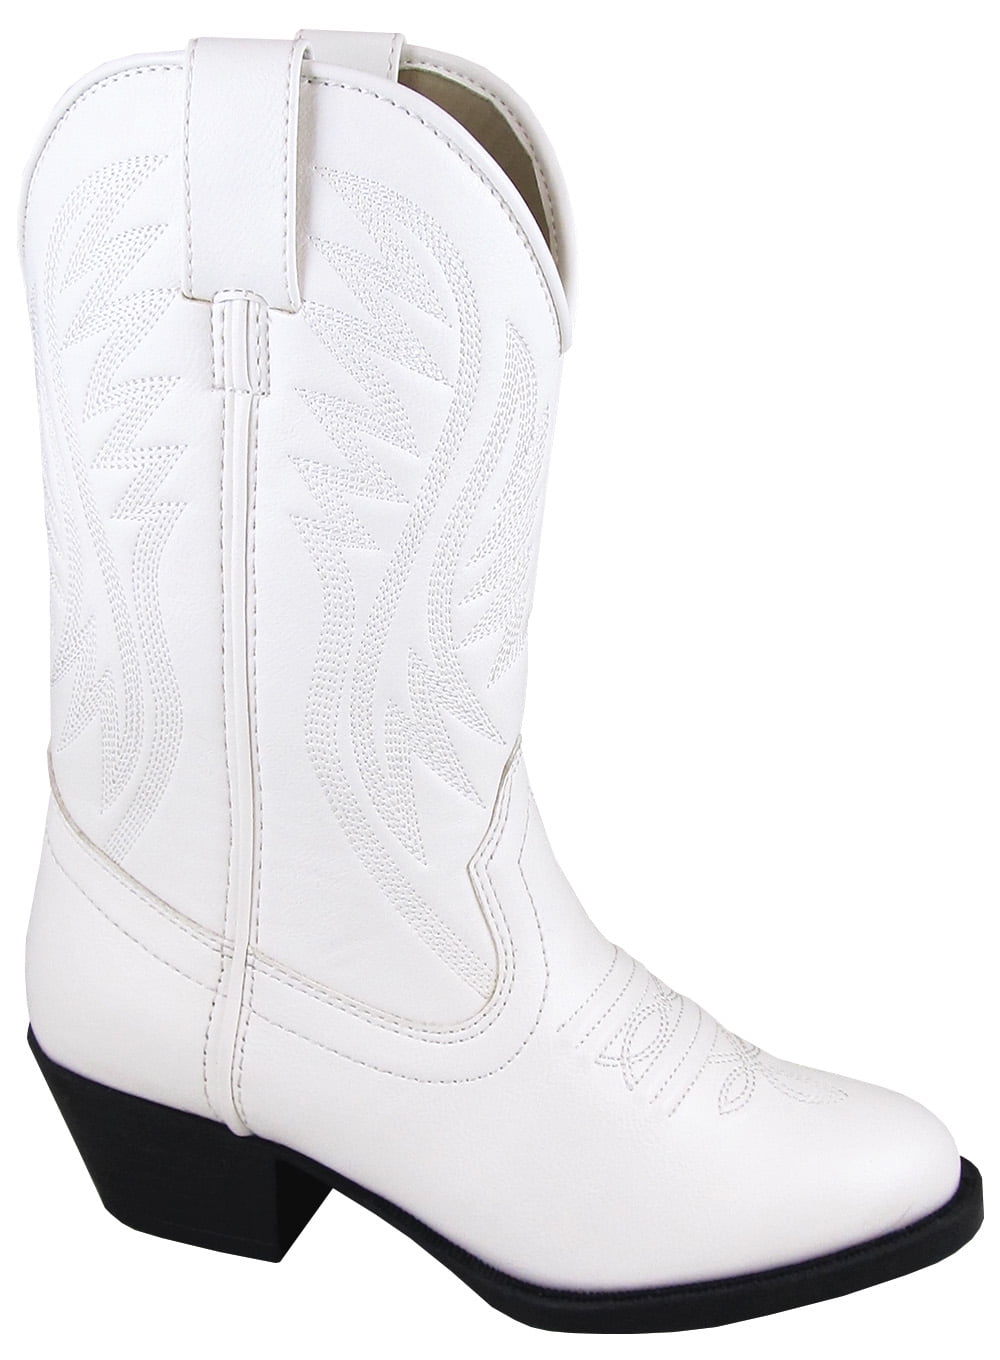 white boots canada